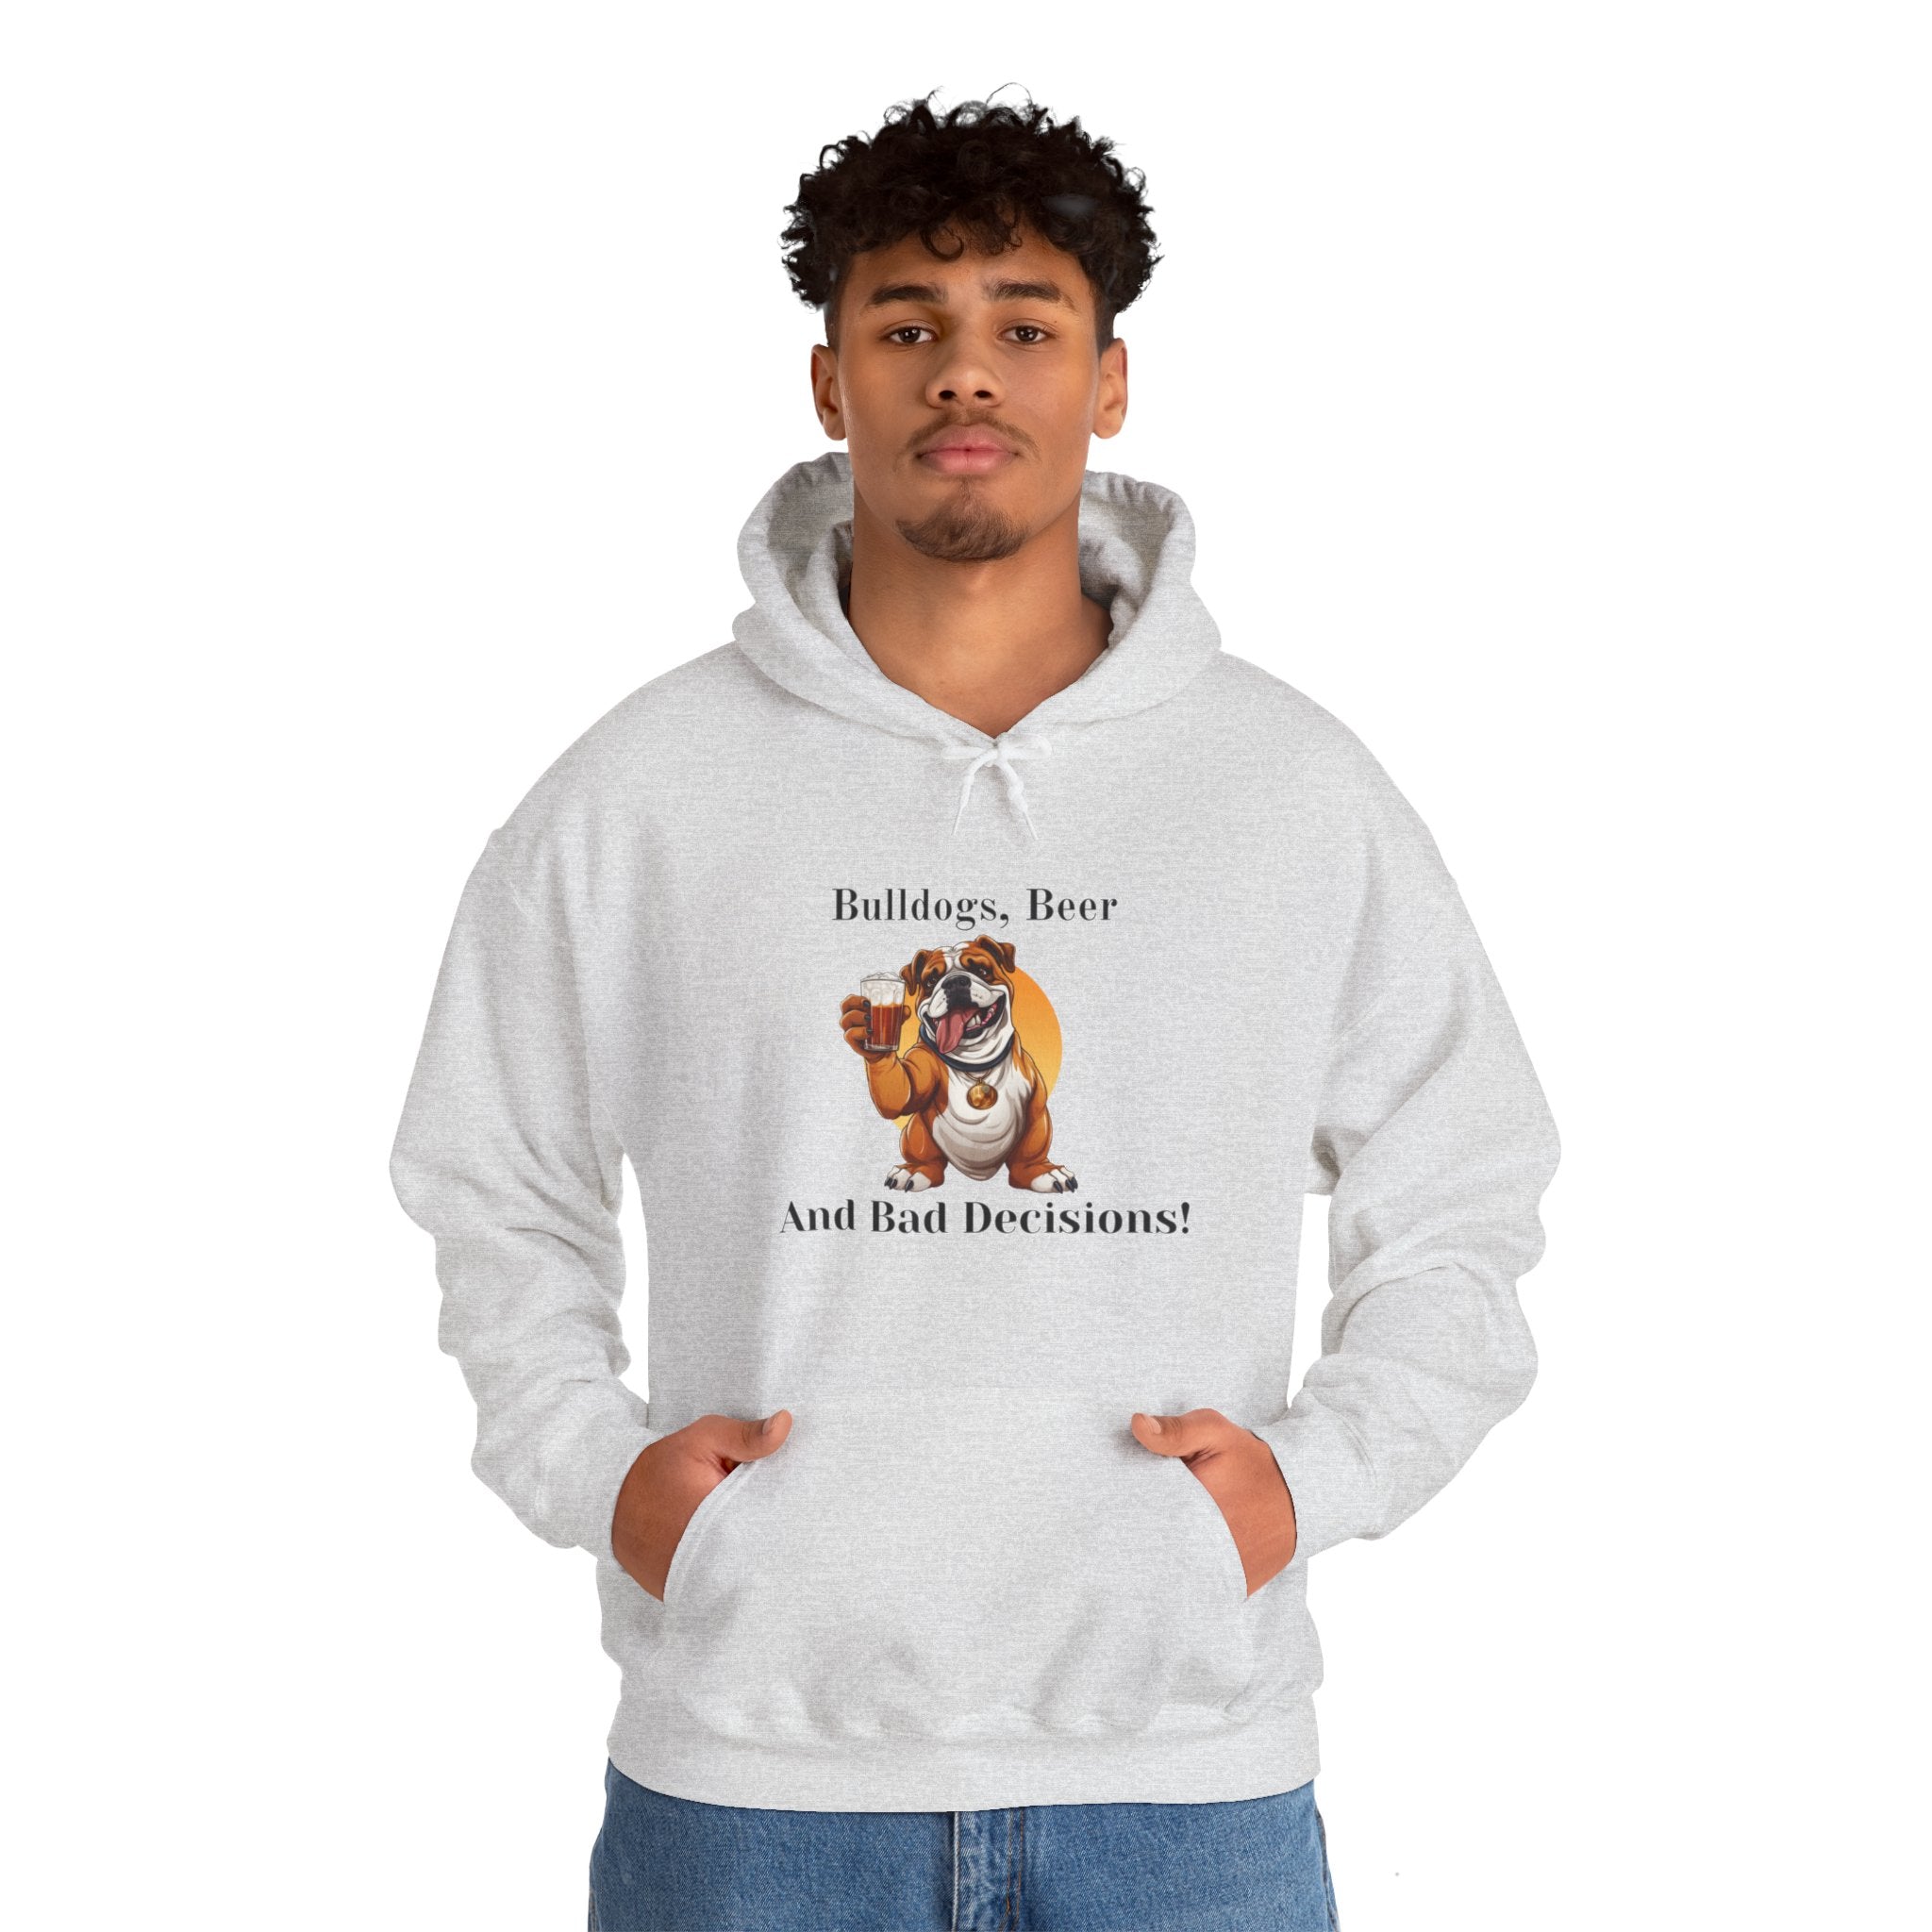 Bulldogs, Beer, and Bad Decisions" Hoodie - Your Go-To Gear for Mischievous Times! (English/Brown)